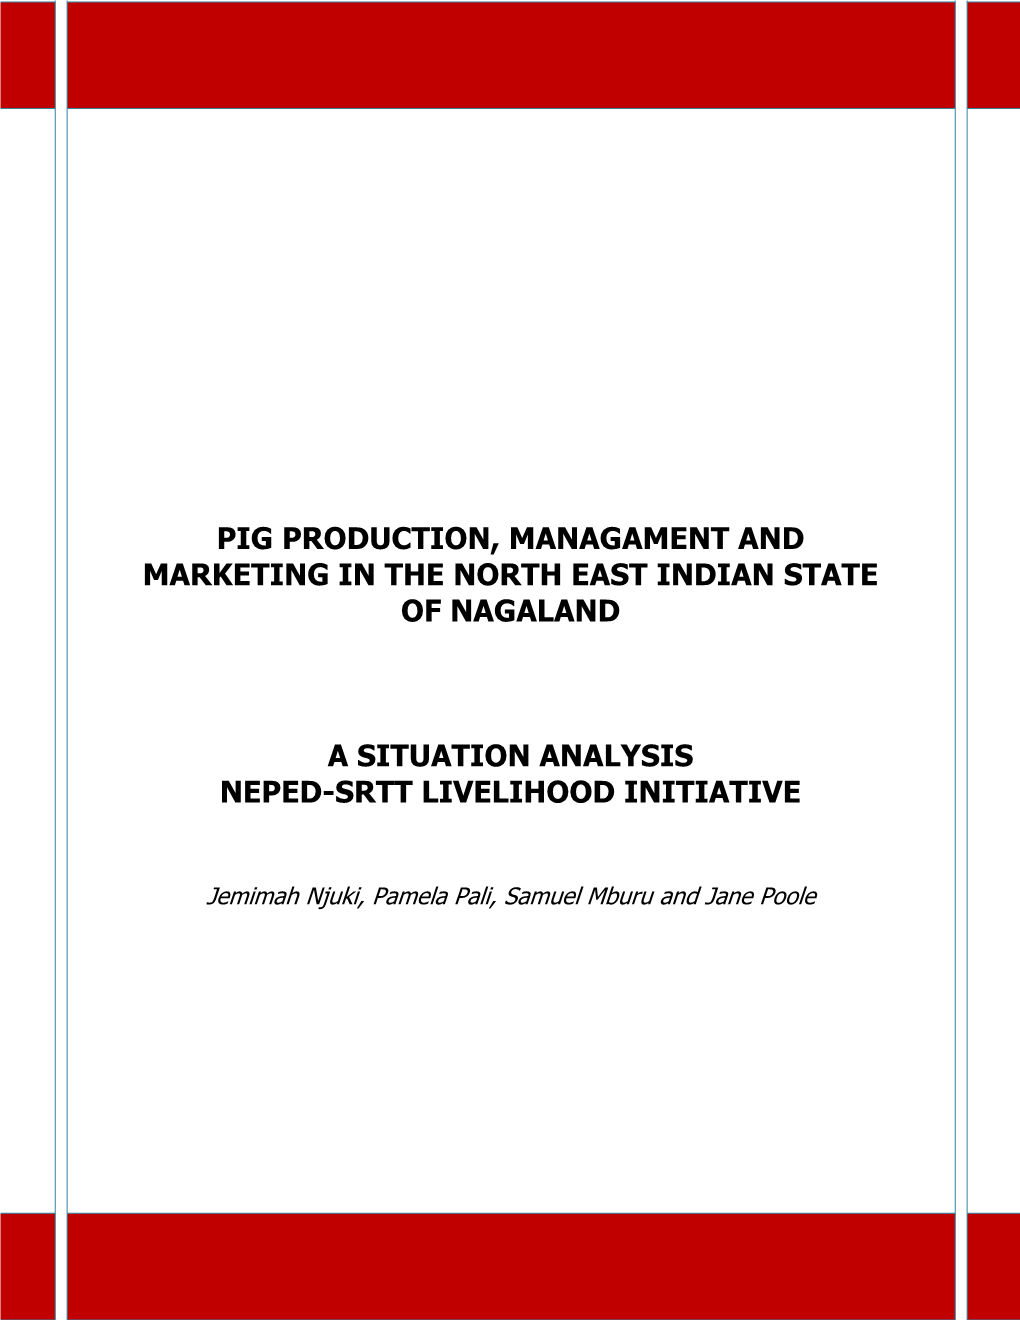 Pig Production, Managament and Marketing in the North East Indian State of Nagaland